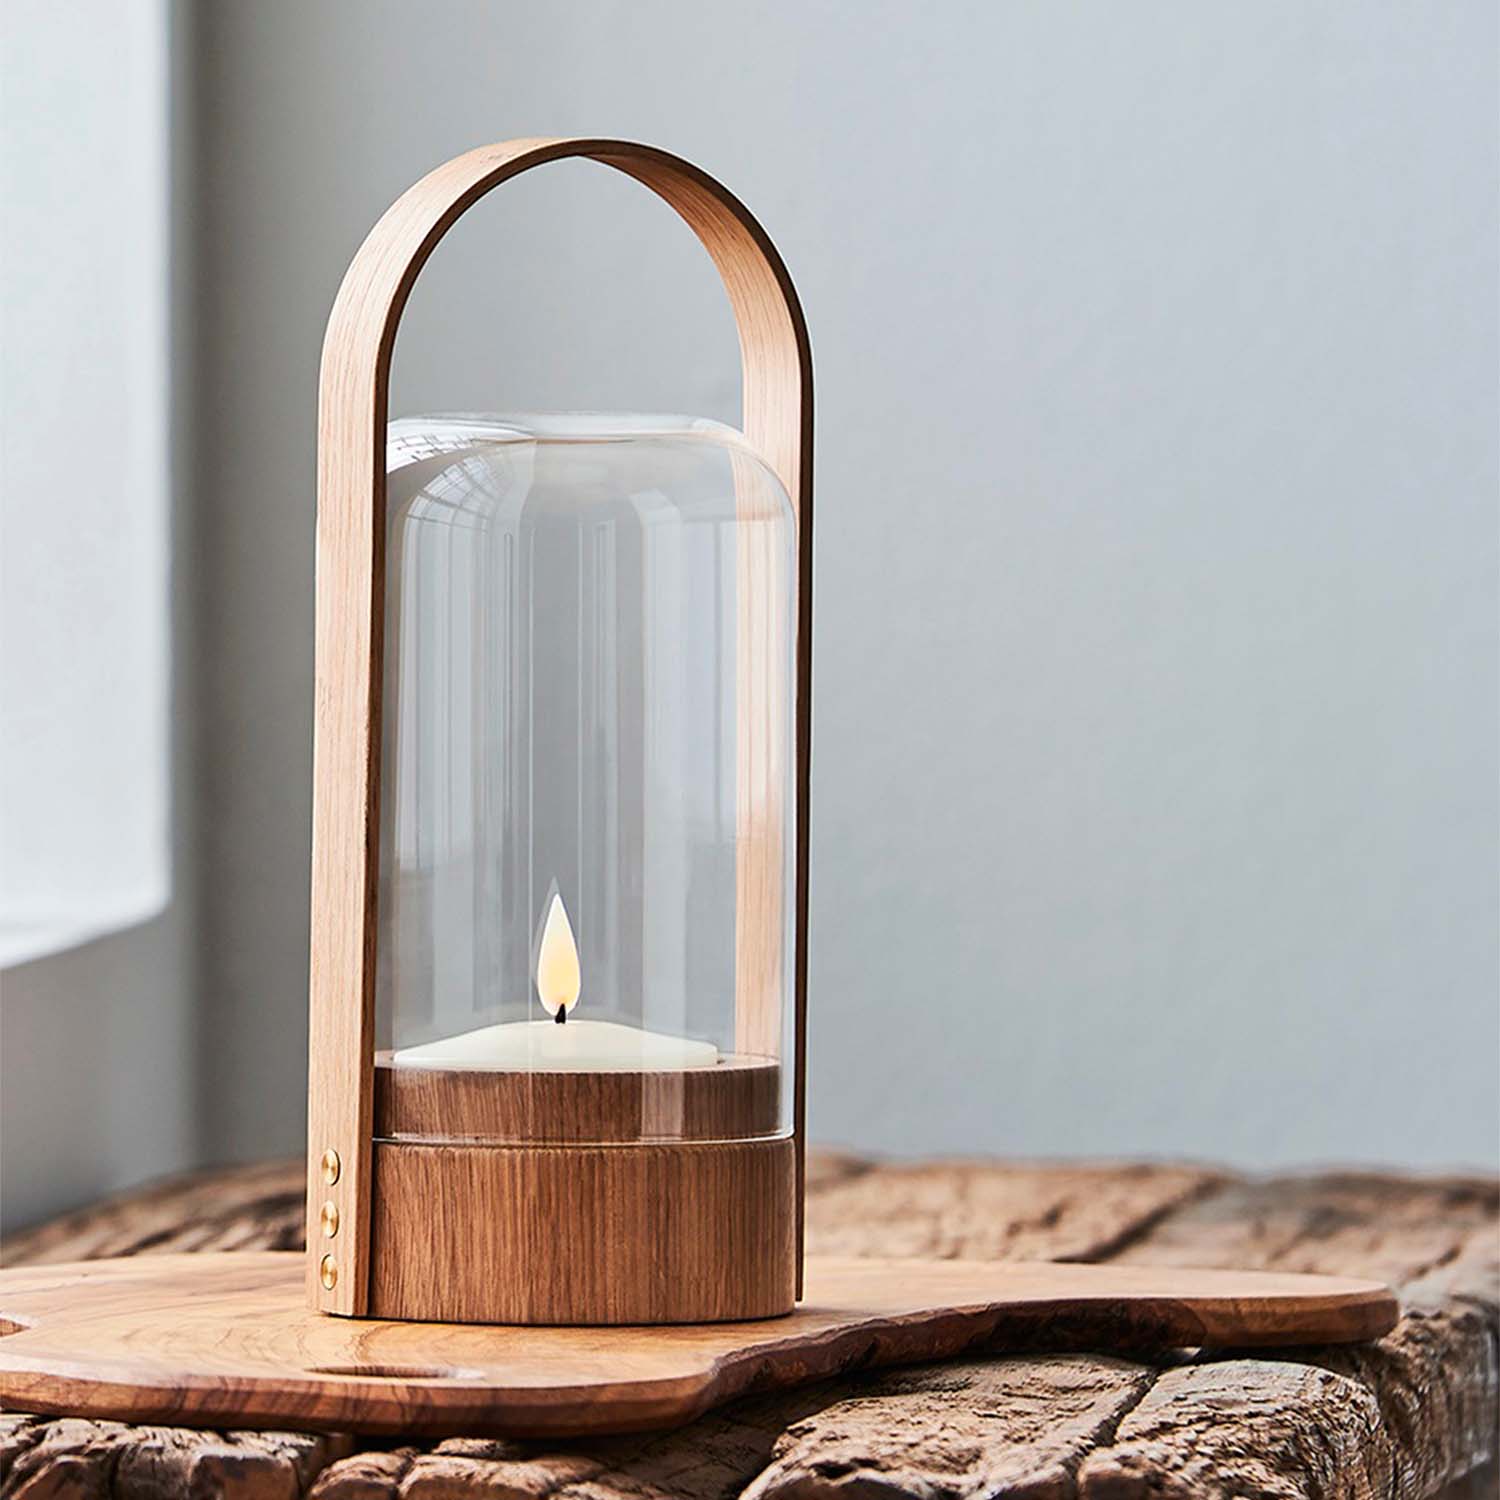 CANDLELIGHT - Wooden and glass candle lamp with handle, rechargeable